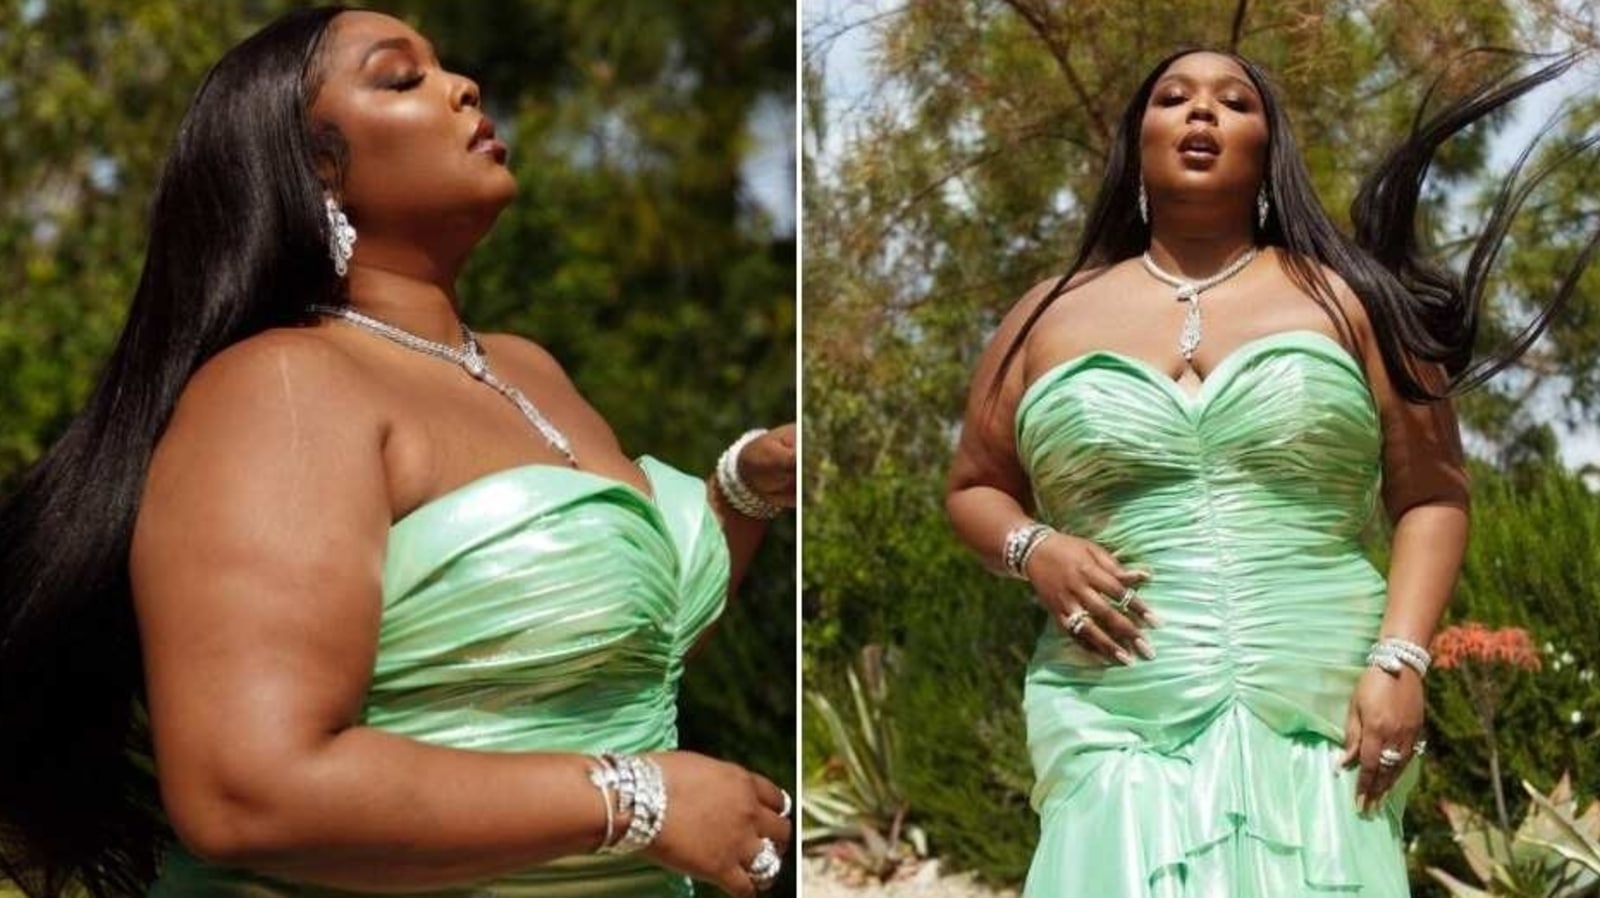 Lizzo Changes Into Second Dress to Present at Grammys 2021: Photo 4532892, 2021 Grammys, Grammys, Lizzo Photos